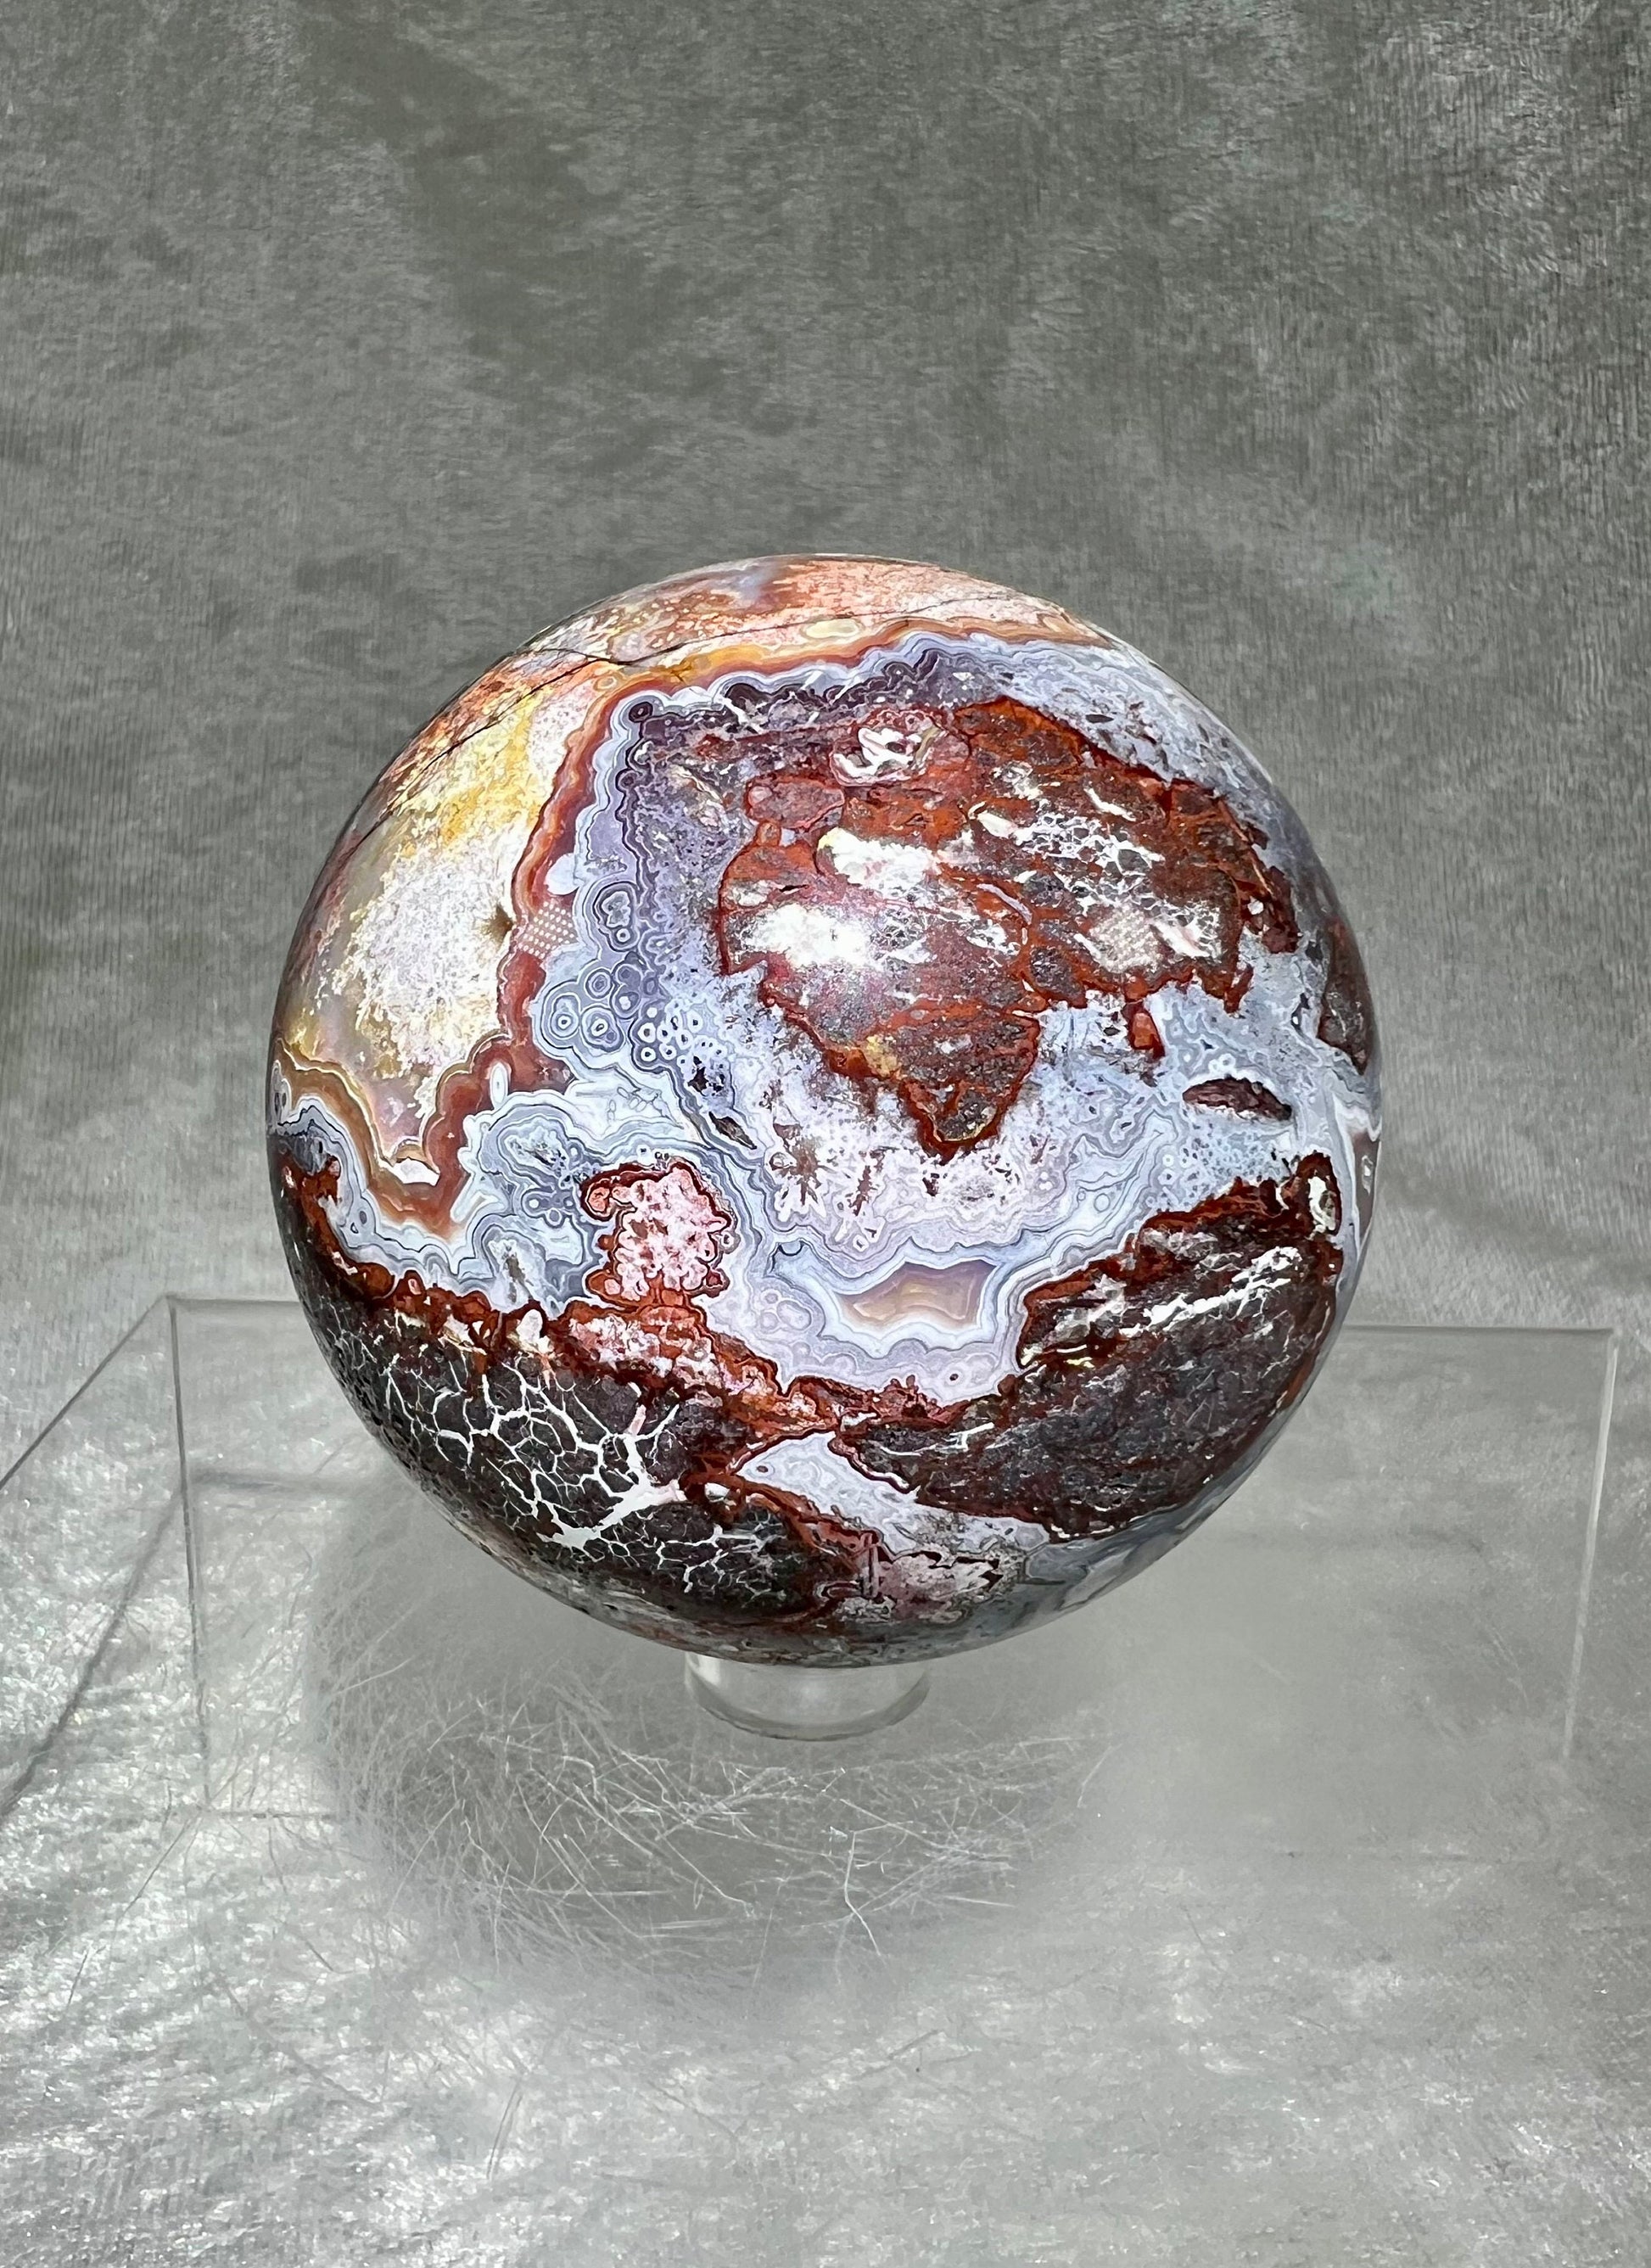 Druzy Mexican Crazy Lace Agate Sphere. 68mm. Beautiful Pinks And Purples With Incredible Patterns And Lacing.